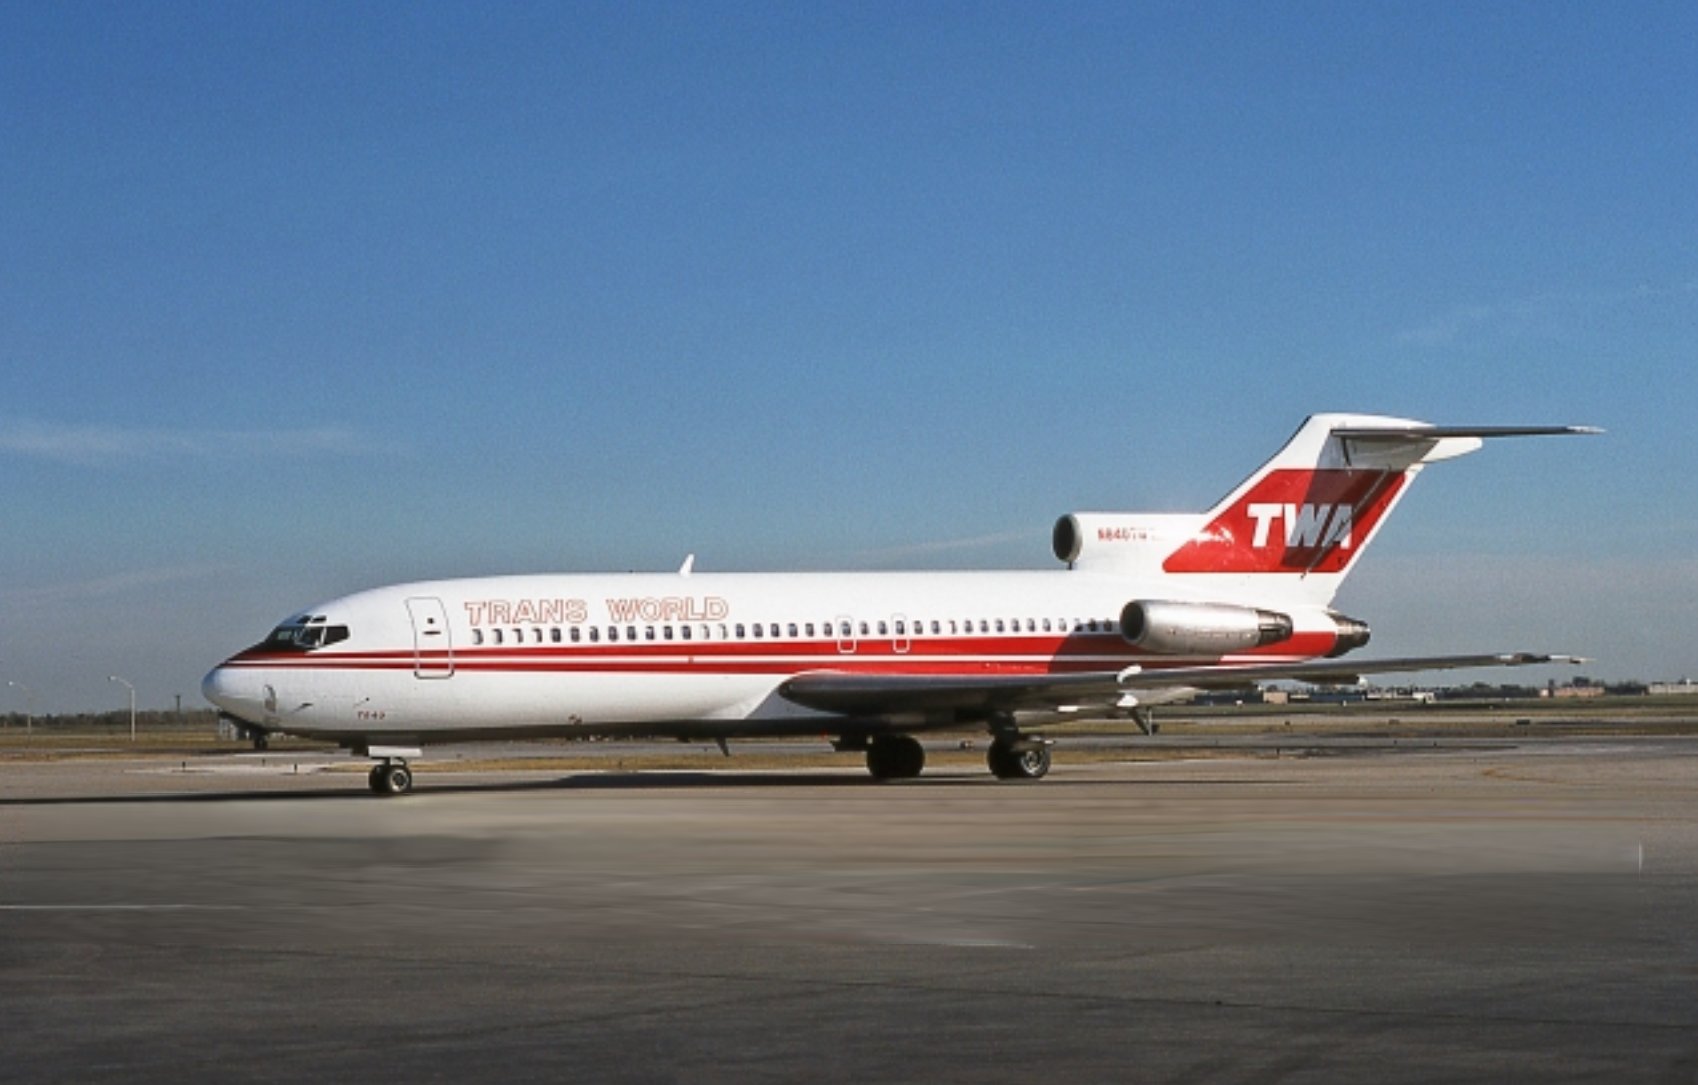 A note from one of the TWA 841 accident investigators